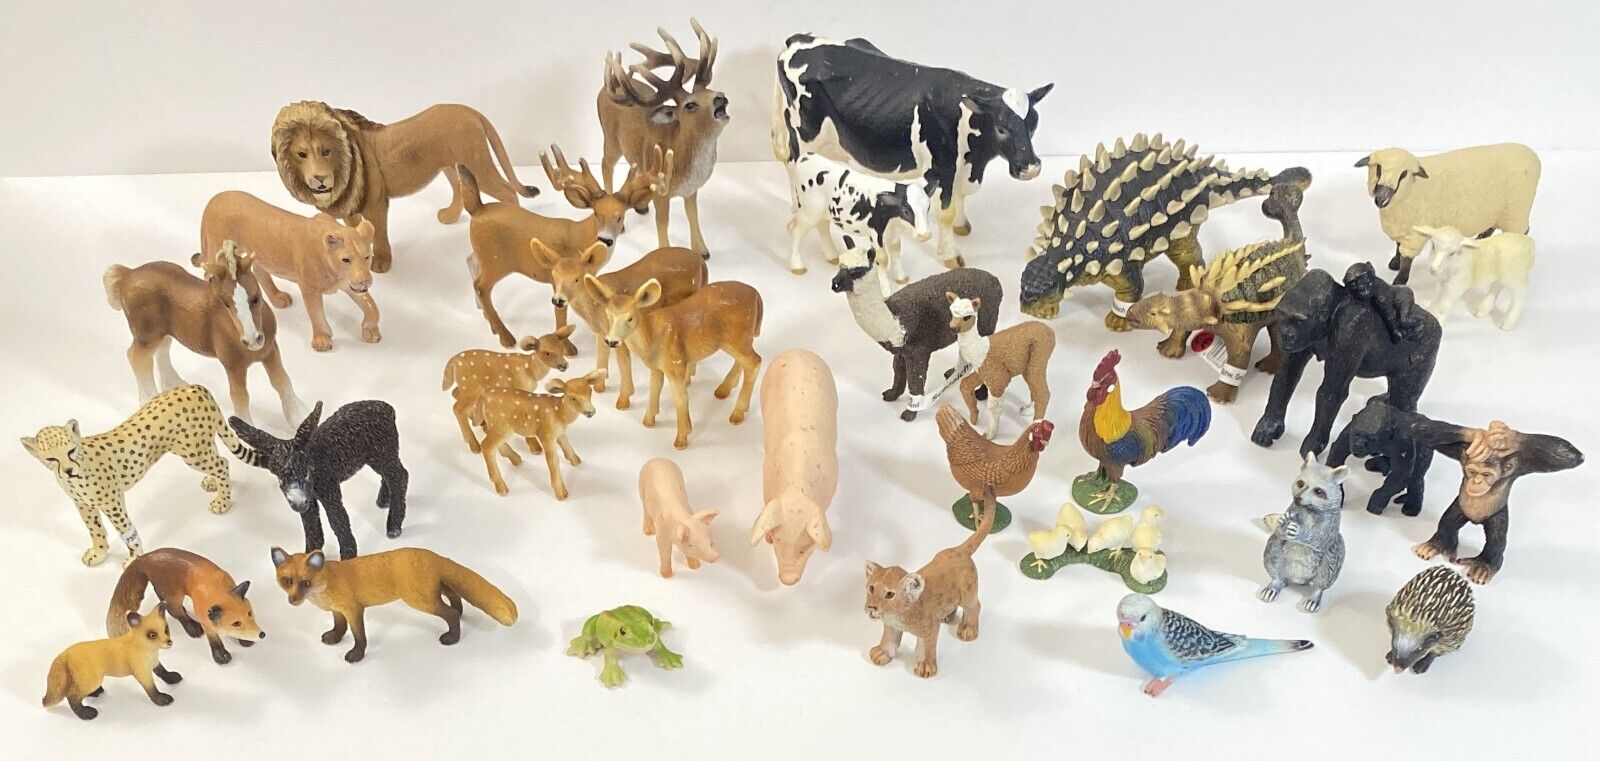 Schleich Safari Ltd. Huge Lot Of 35 Animals Wild, Zoo, Farm New and Gently Used